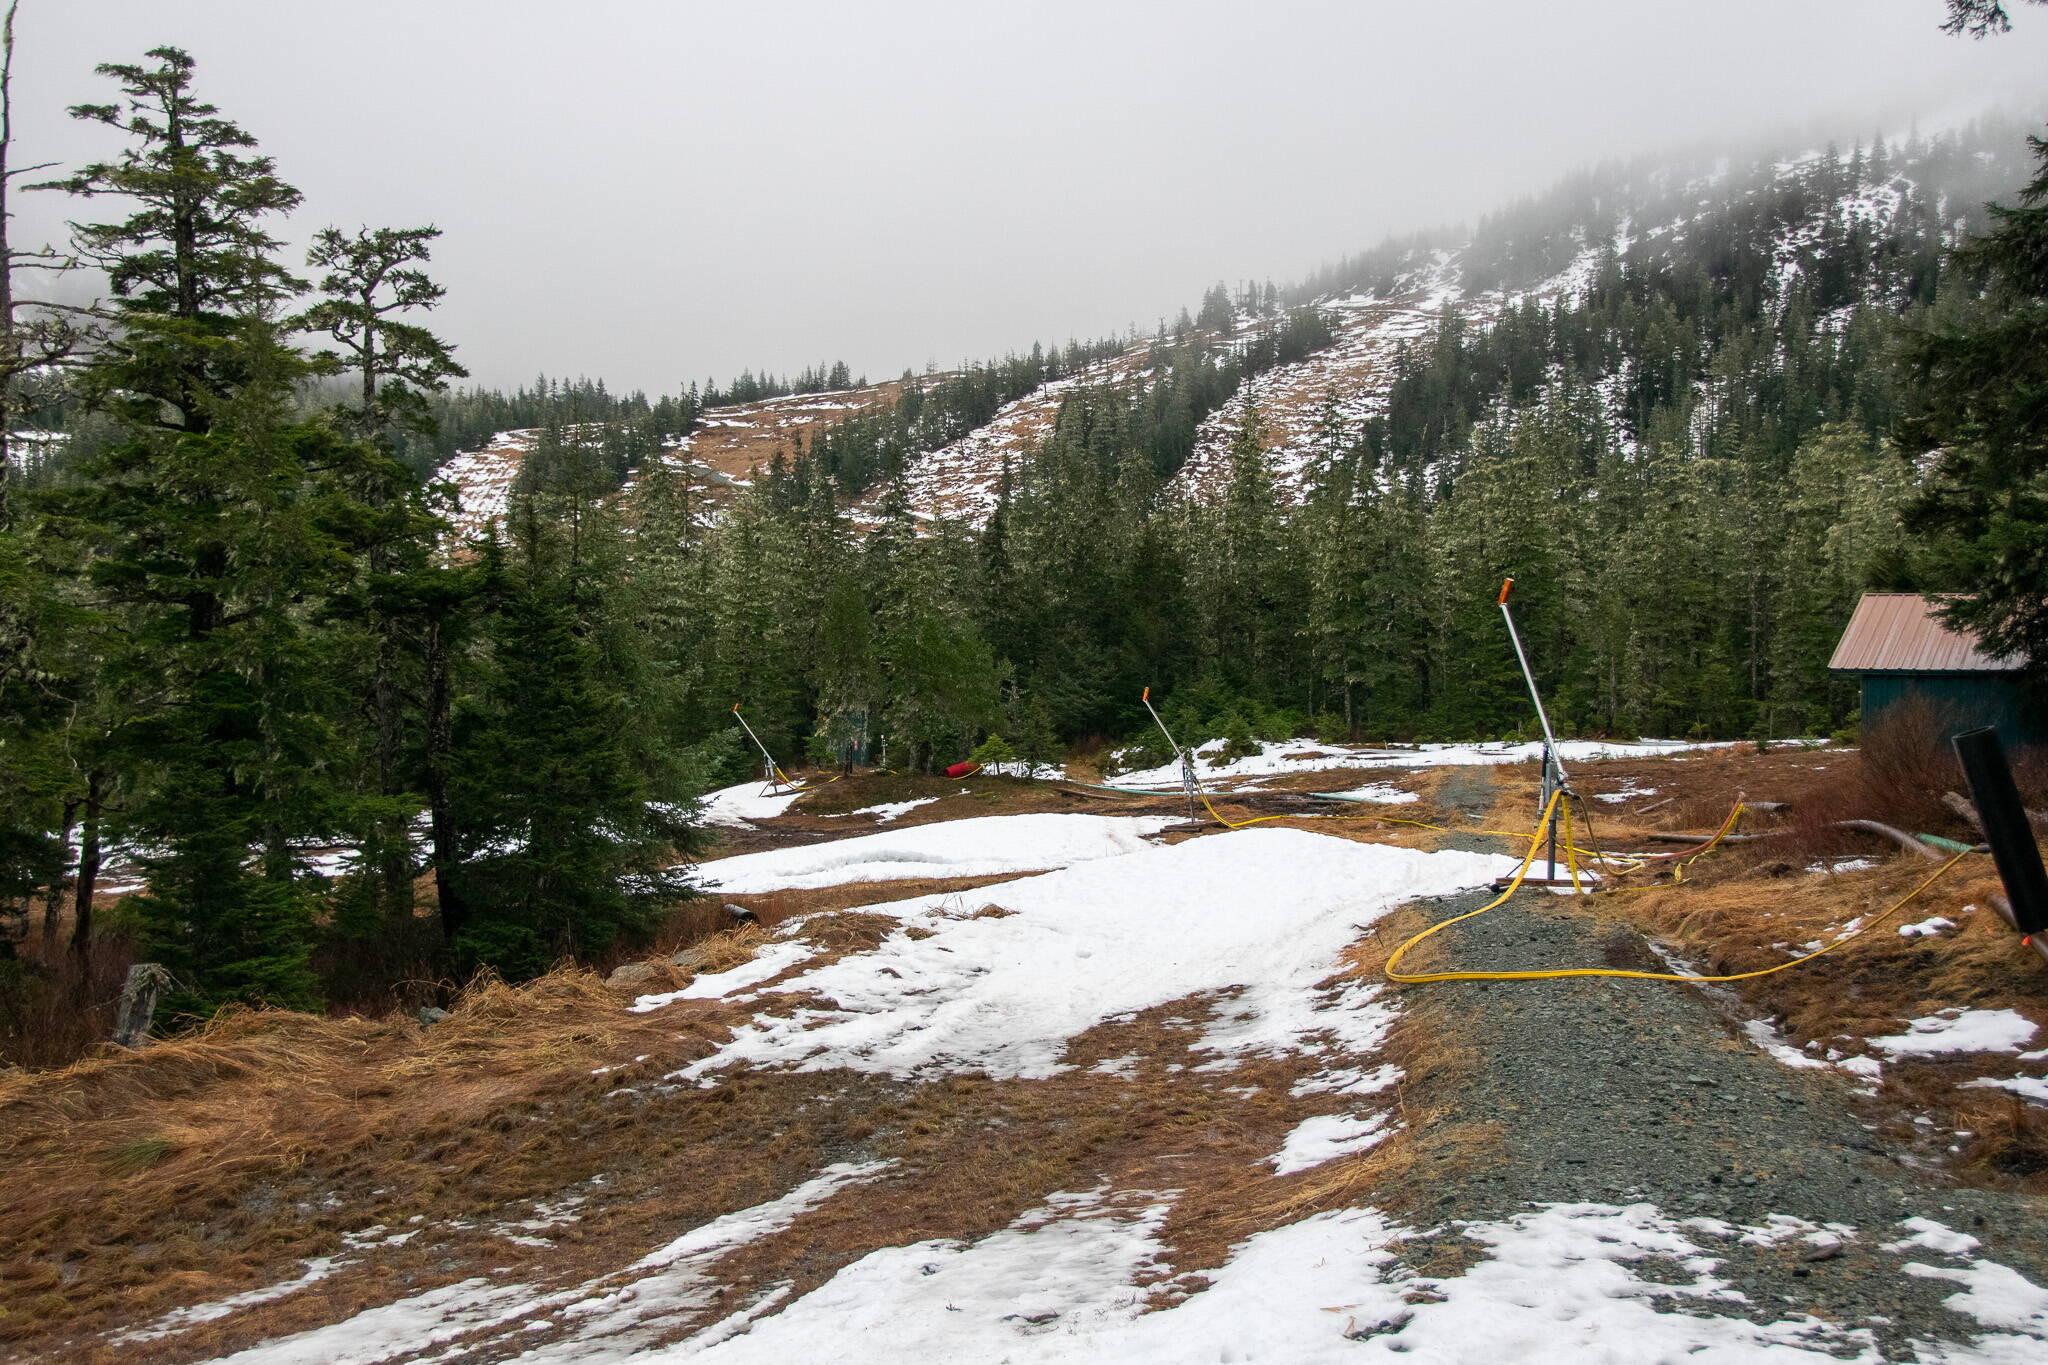 Scant patches of snow remain at the base of Eaglecrest Ski area on Wednesday despite snowmaking efforts that occurred during the weekend, due to warmer temperatures and rain this week. The opening date for the ski area, originally set for Dec. 2 and then delayed until Dec. 9, is now undetermined. (Photo courtesy of Eaglecrest Ski Area)